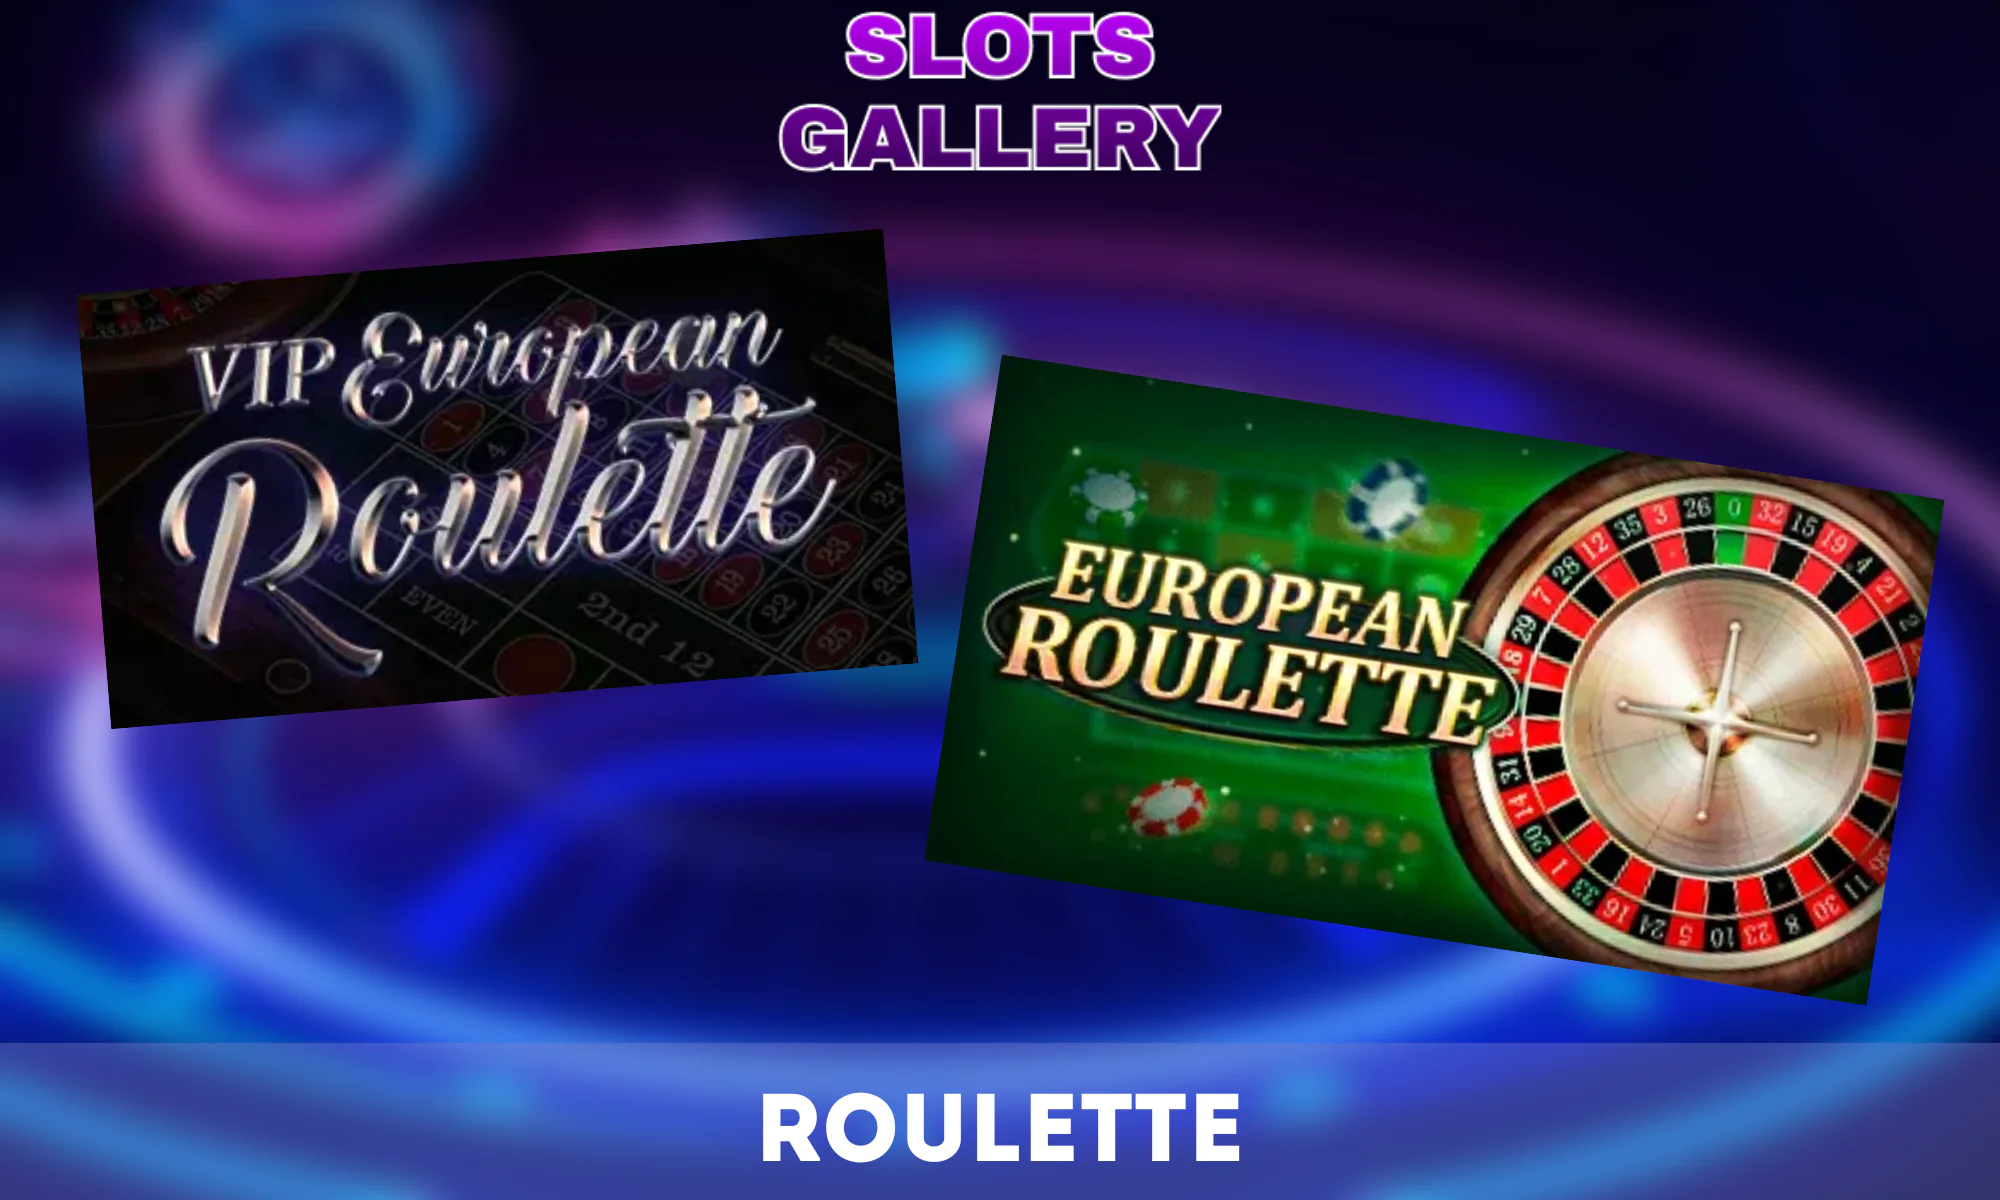 A wide range of different roulette games at Slots gallery